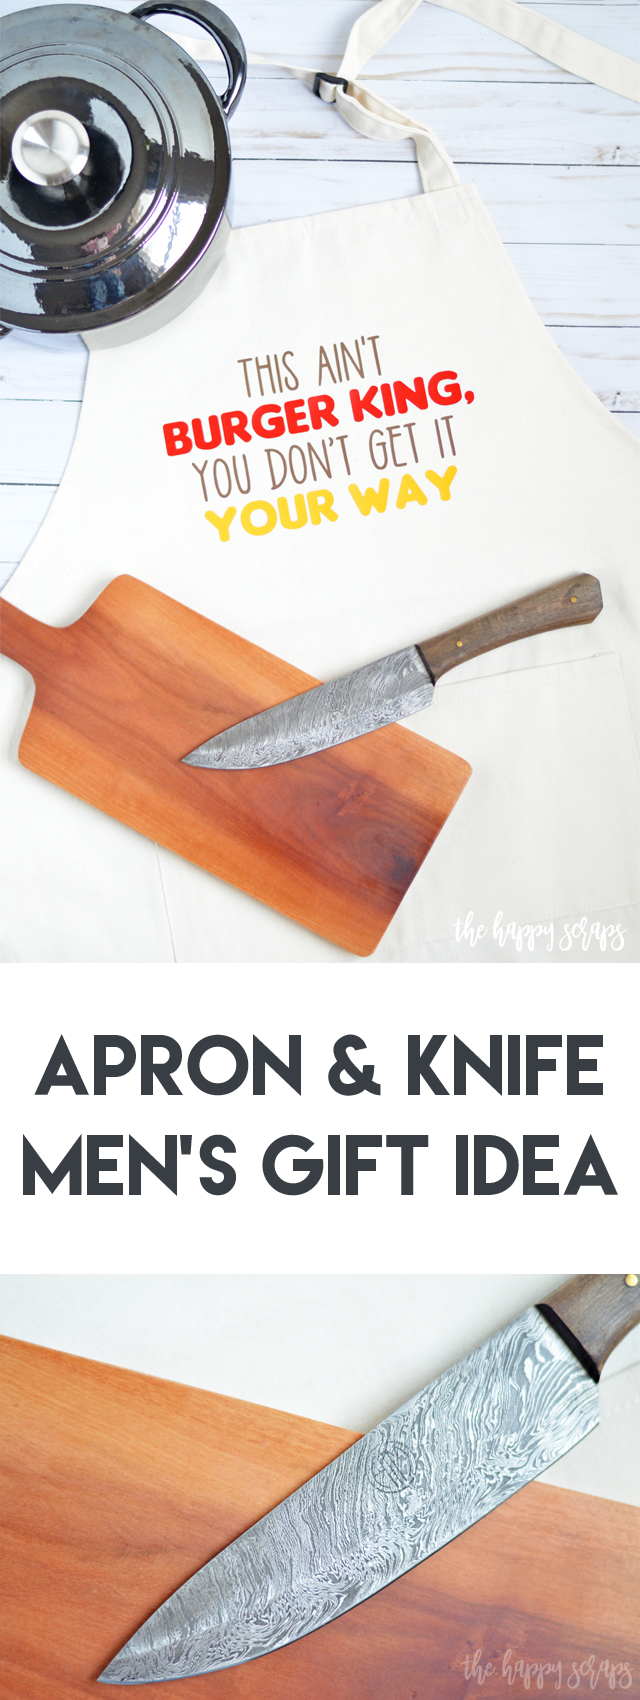 This Apron & Knife Men's Gift Idea is perfect for that guy that likes to cook and is hard to shop for! Get the details over on the blog. 